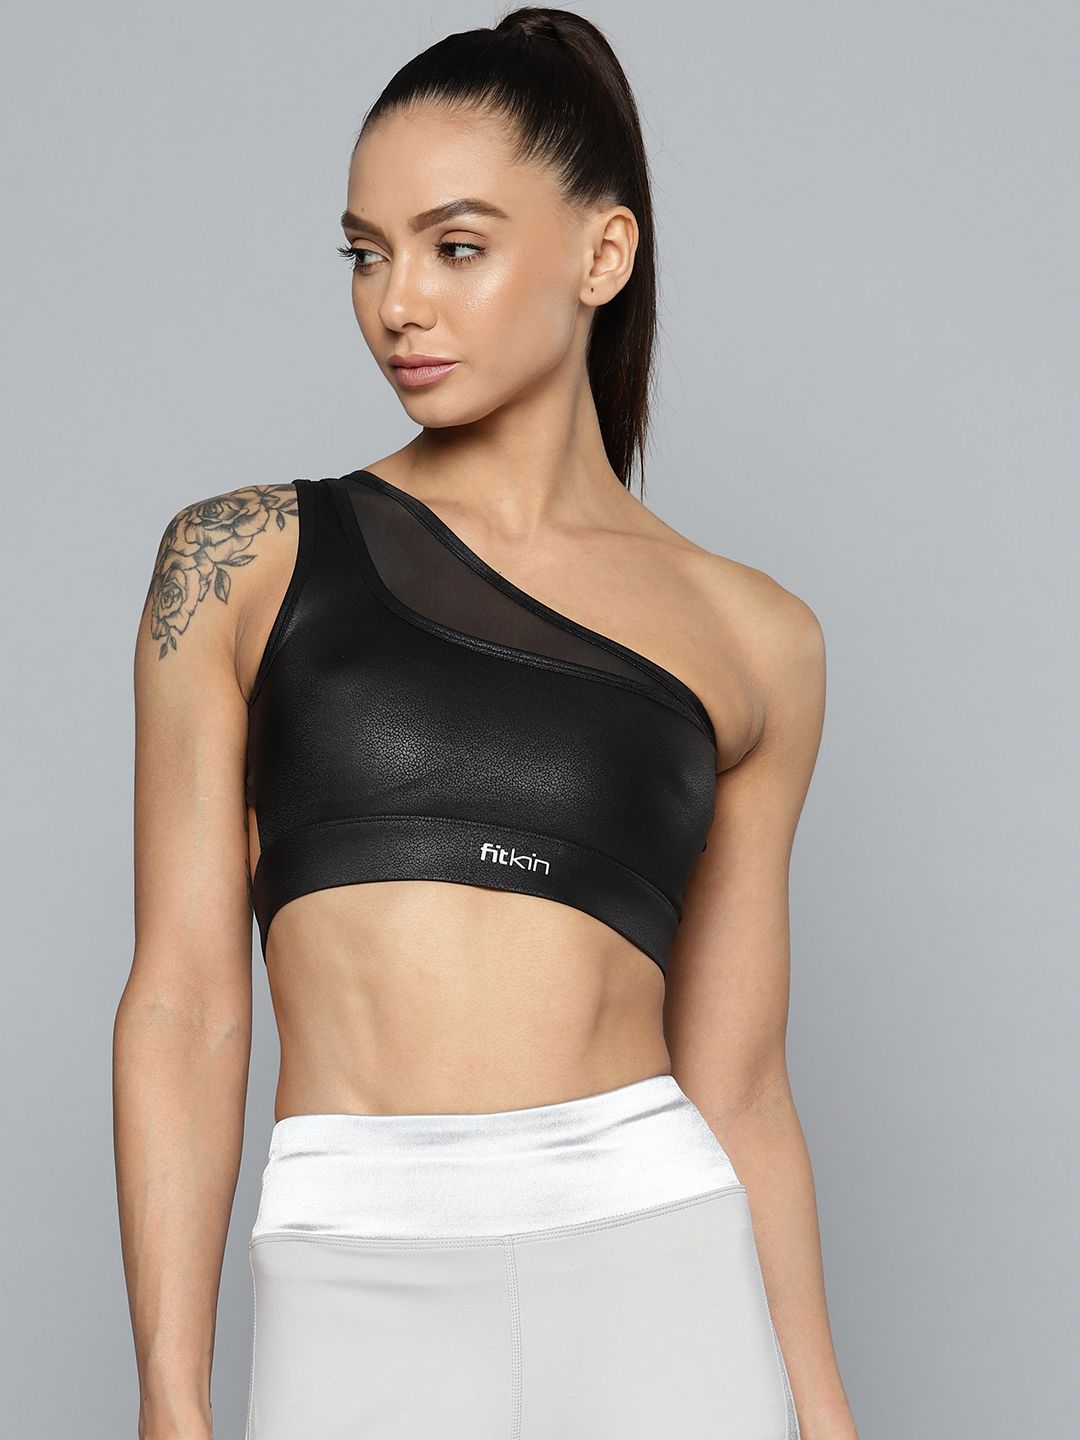 Fitkin Black One Shoulder Sports Bra B63-XS Price in India